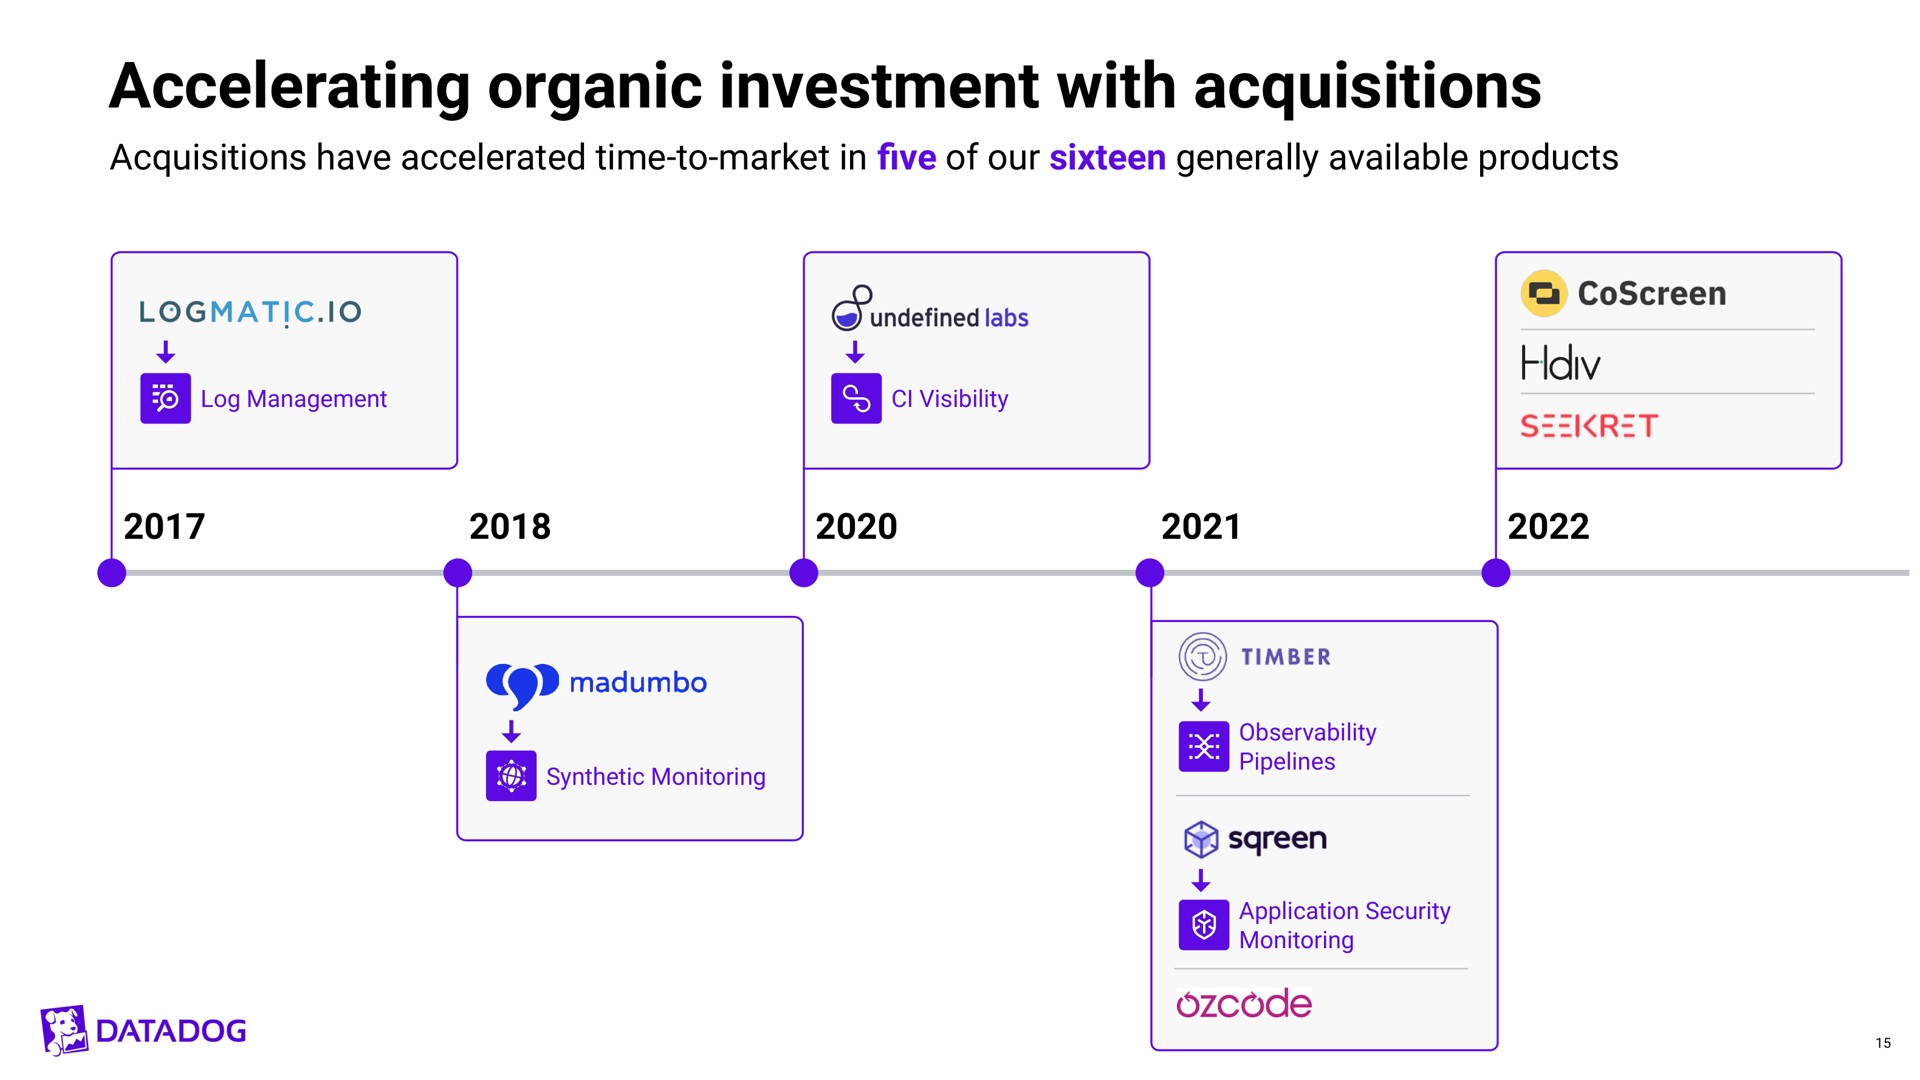 accelerating organic investment with acquisitions | Datadog